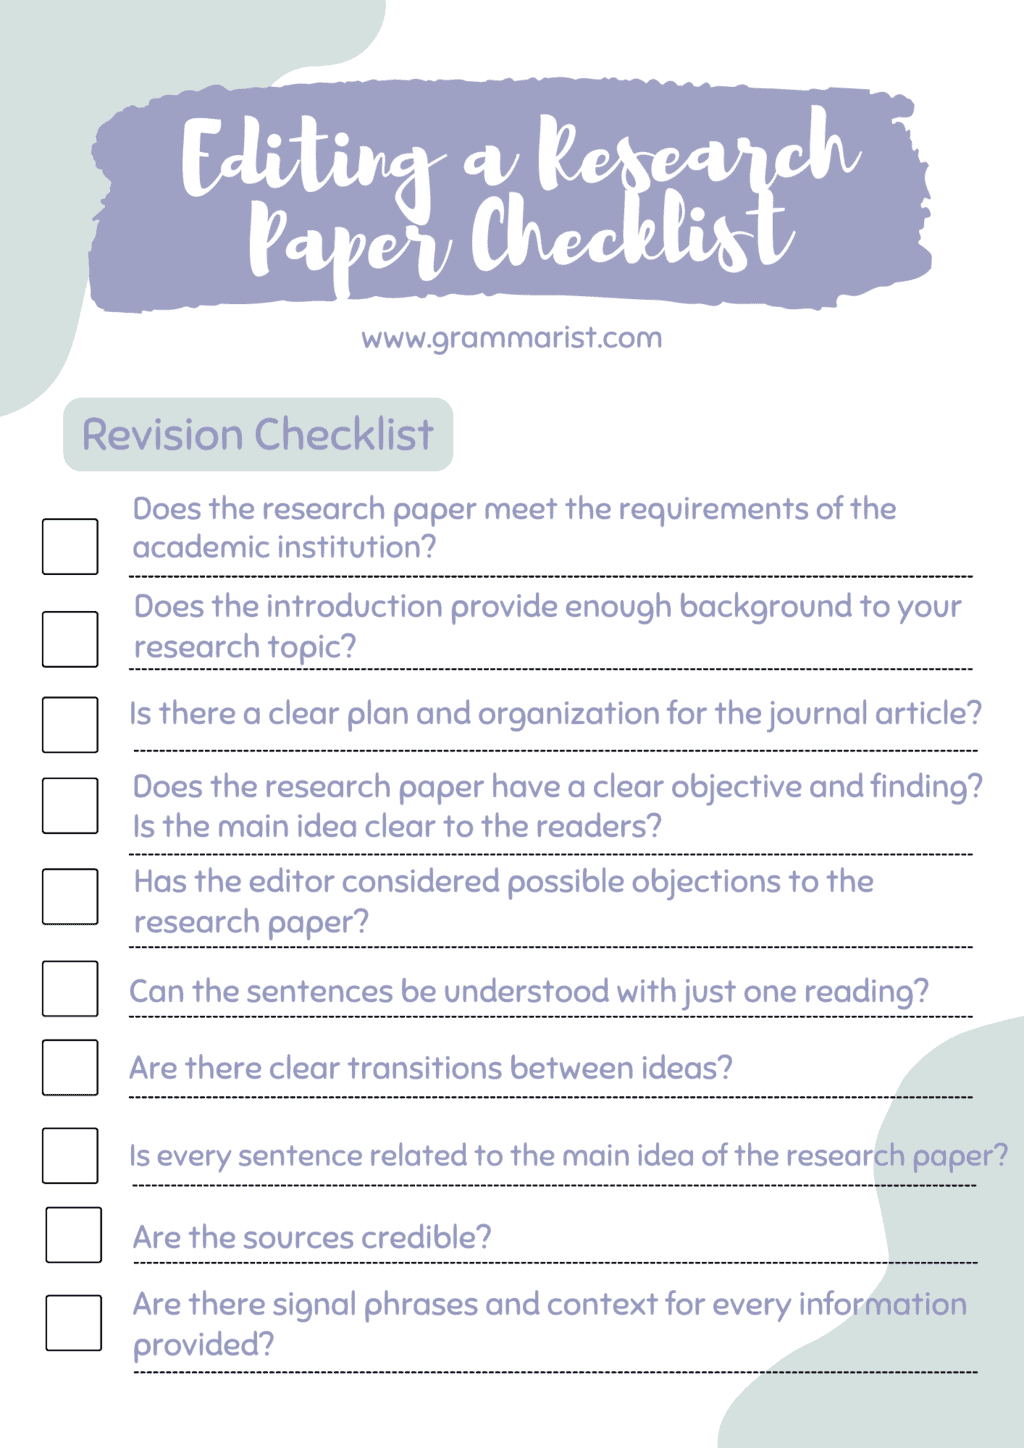 editing a research paper checklist